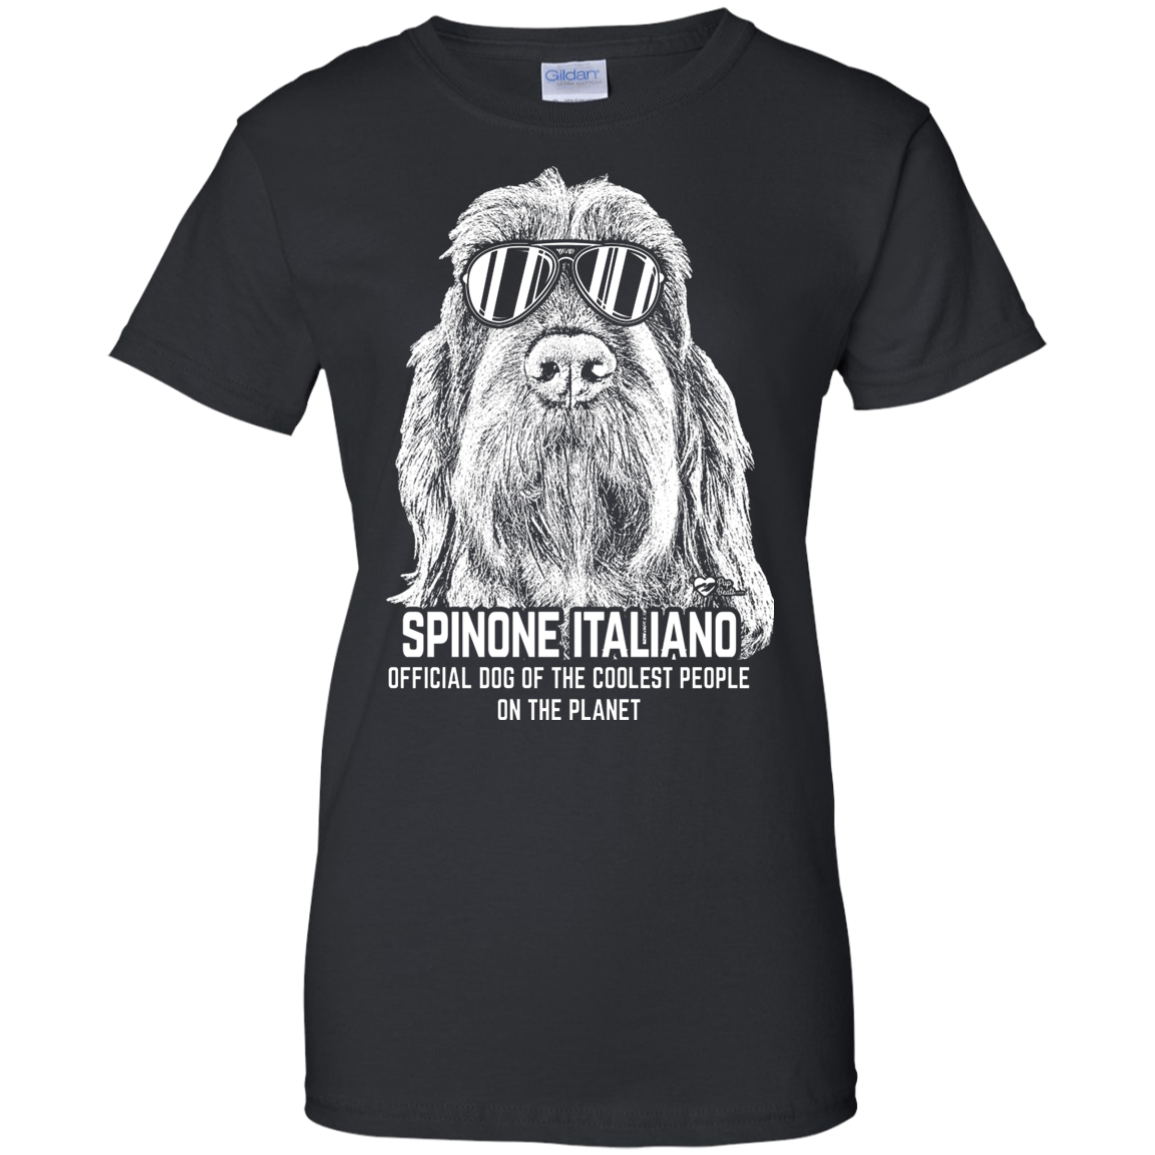 Official Dog Of The Coolest Spinone Italiano Ladies' T-Shirt